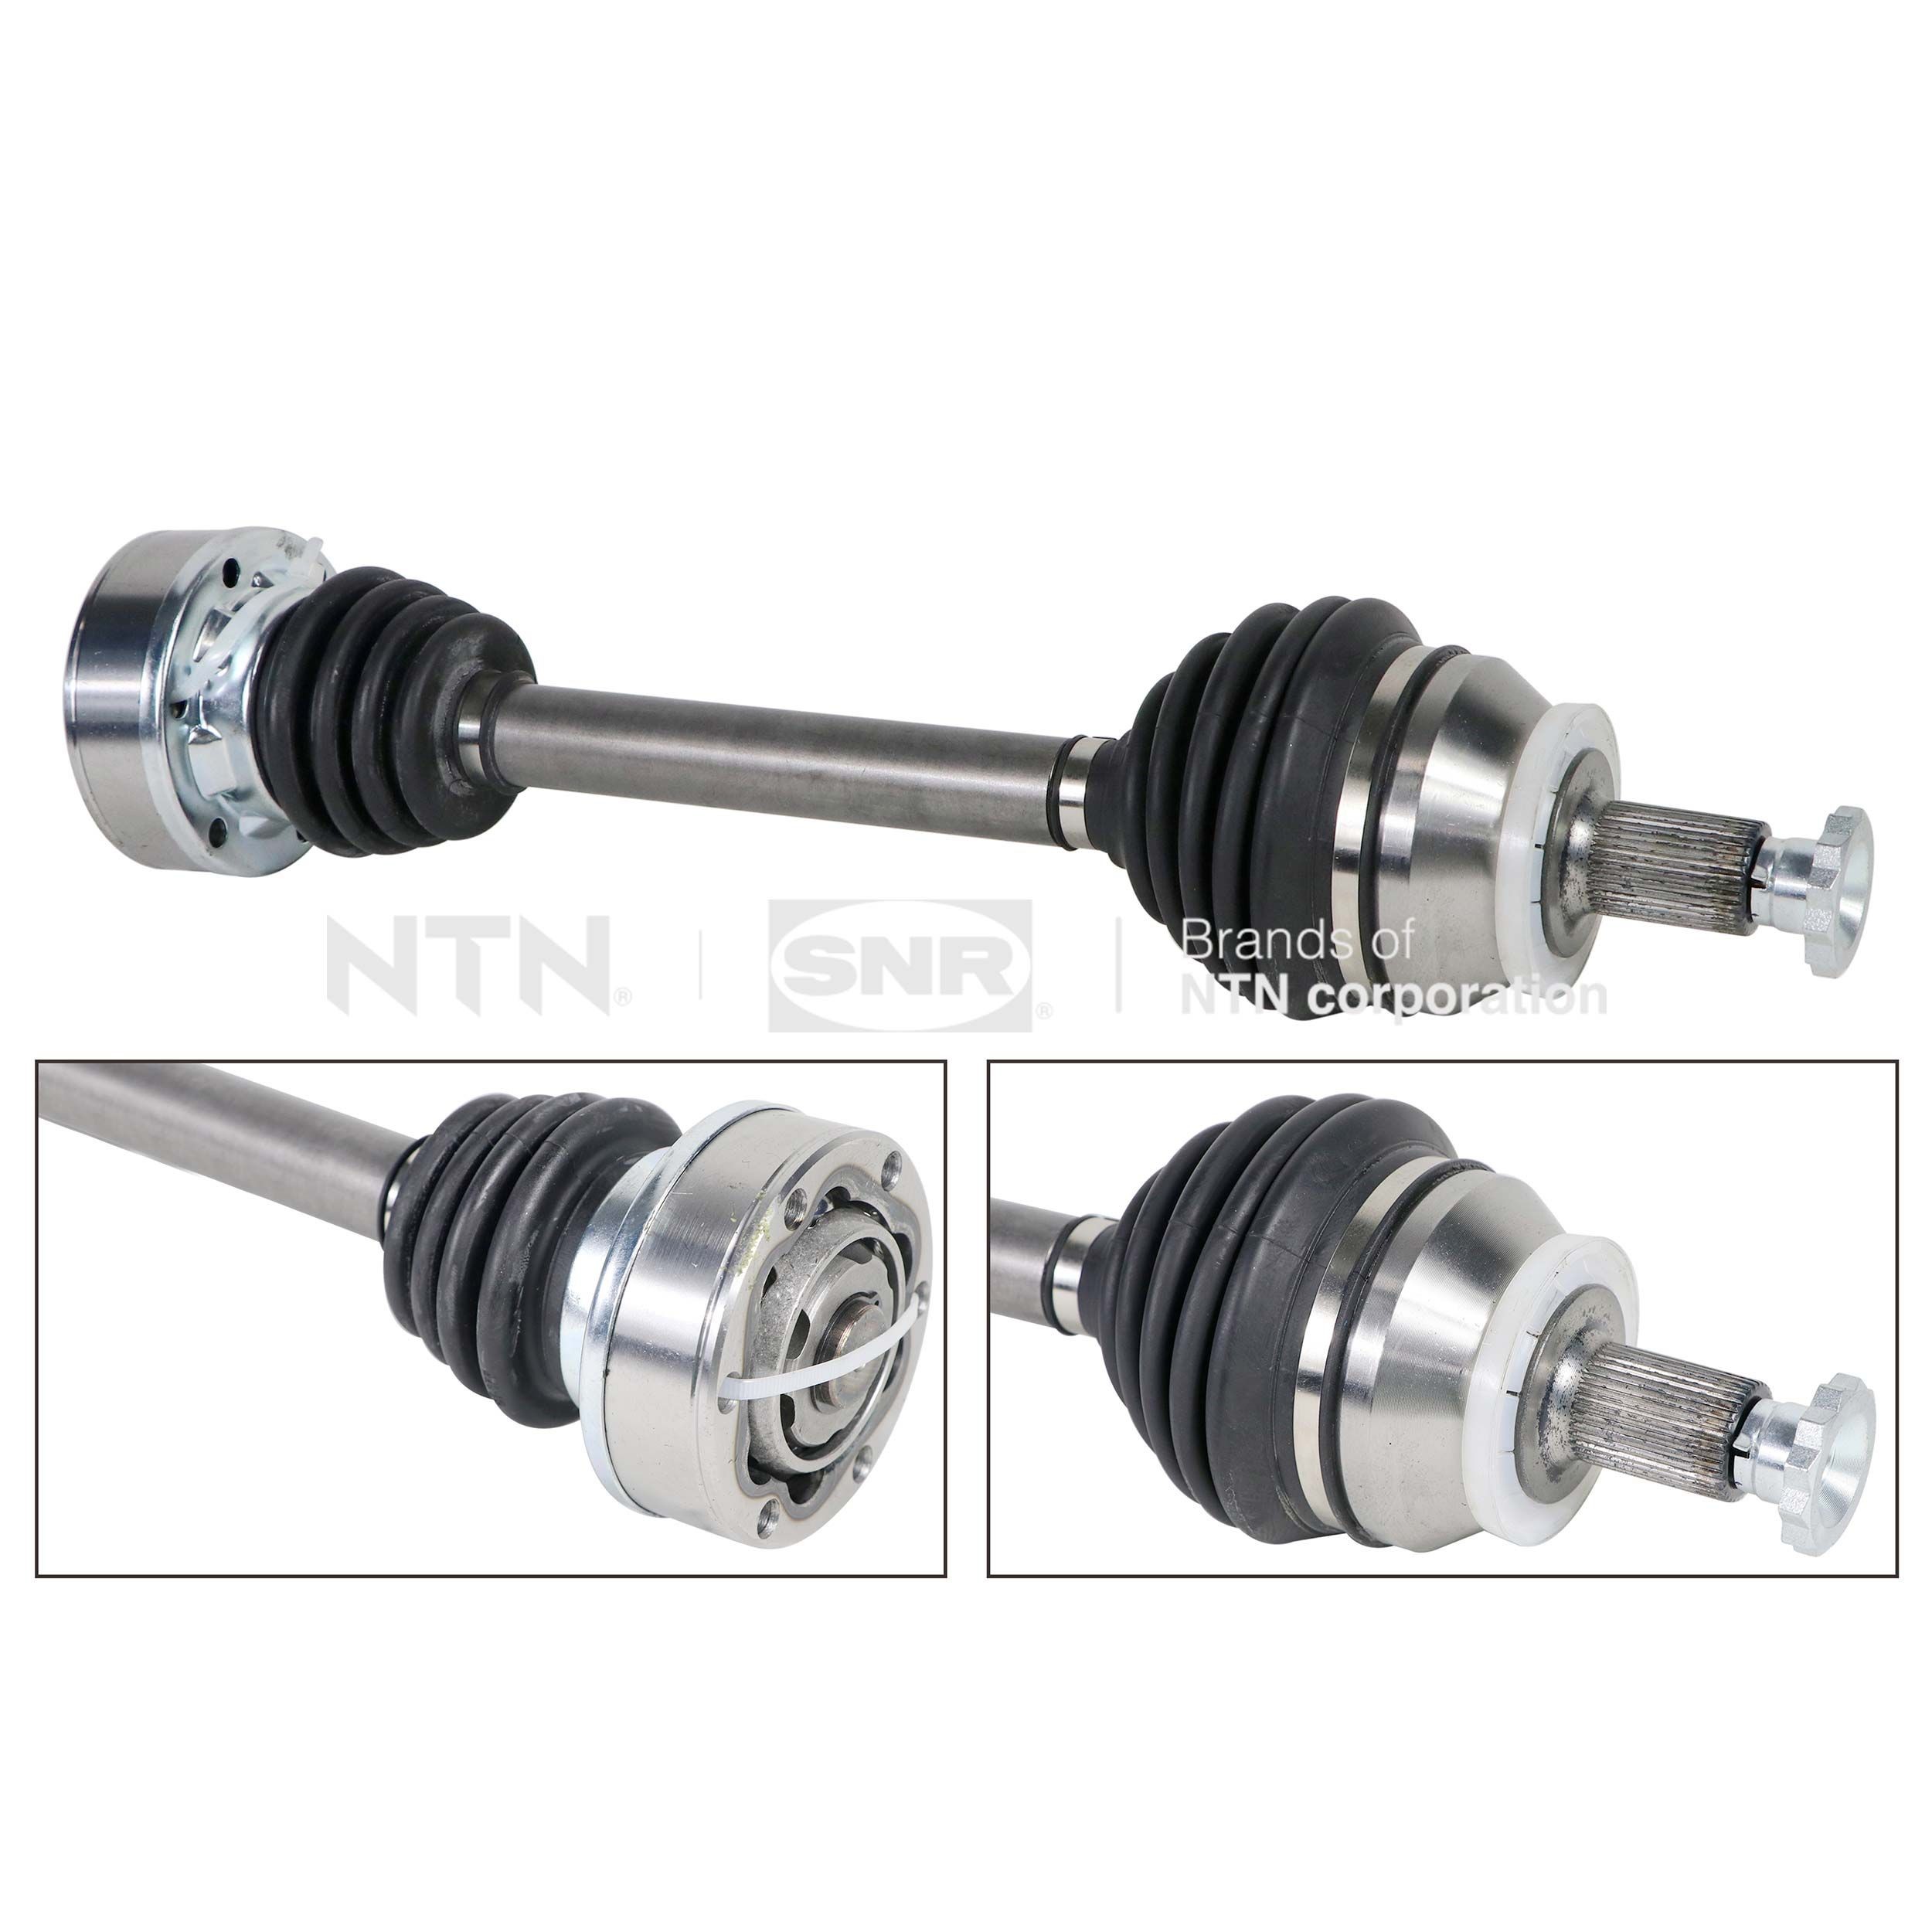 SNR Front Axle Left, 496mm Length: 496mm, External Toothing wheel side: 36 Driveshaft DK54.054 buy